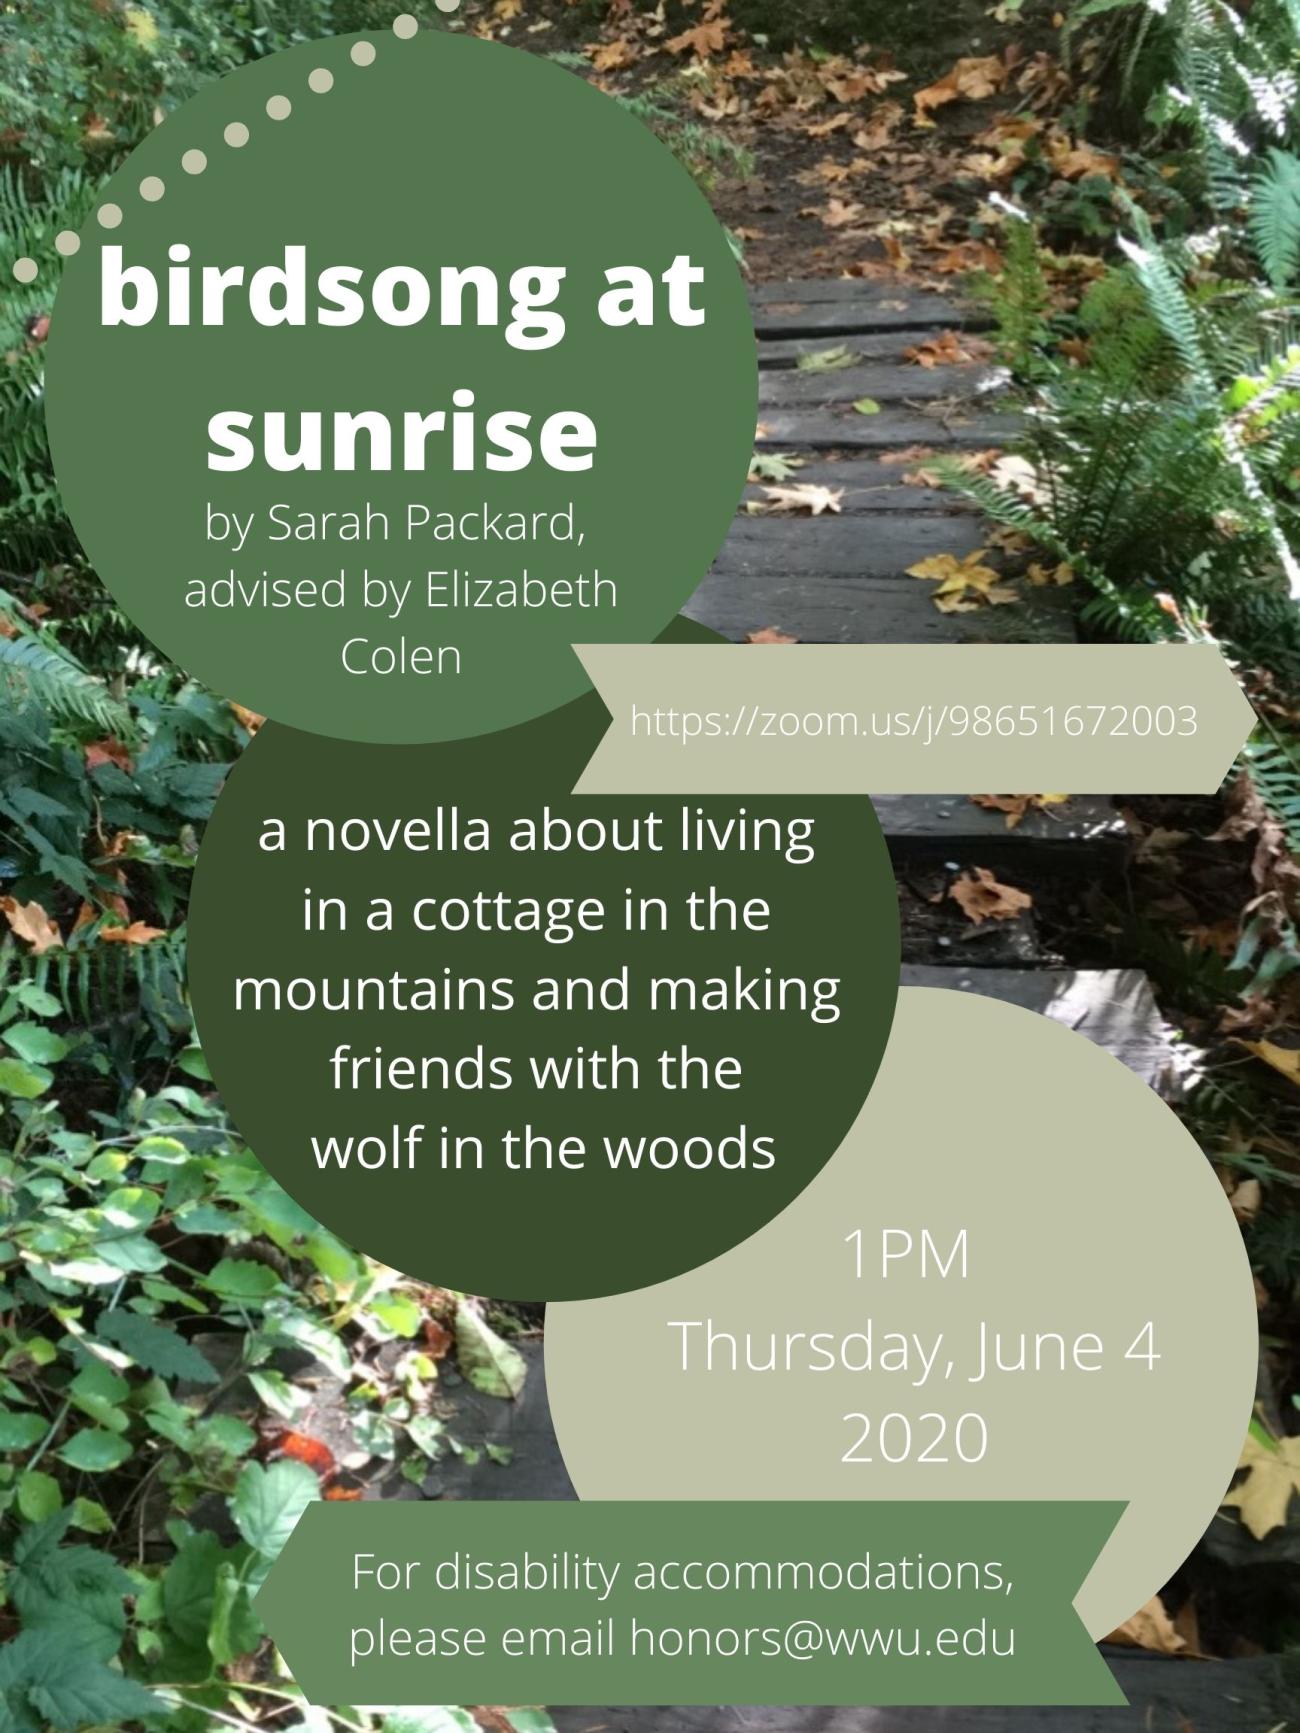 Image: Photo of a wood plank bridge in the woods. One plank is broken. Text in a green circle reads, “birdsong at sunrise, by Sarah Packard, advised by Elizabeth Colen.” In a darker green circle, “a novella about living in a cottage in the mountains and making friends with the wolf in the woods.” A beige banner reads, https://zoom.us/j/98651672003. A beige circle reads, “1PM, Thursday, June 4 2020.” A green banner at the bottom reads, “For disability accommodations, please email honors@wwu.edu.”